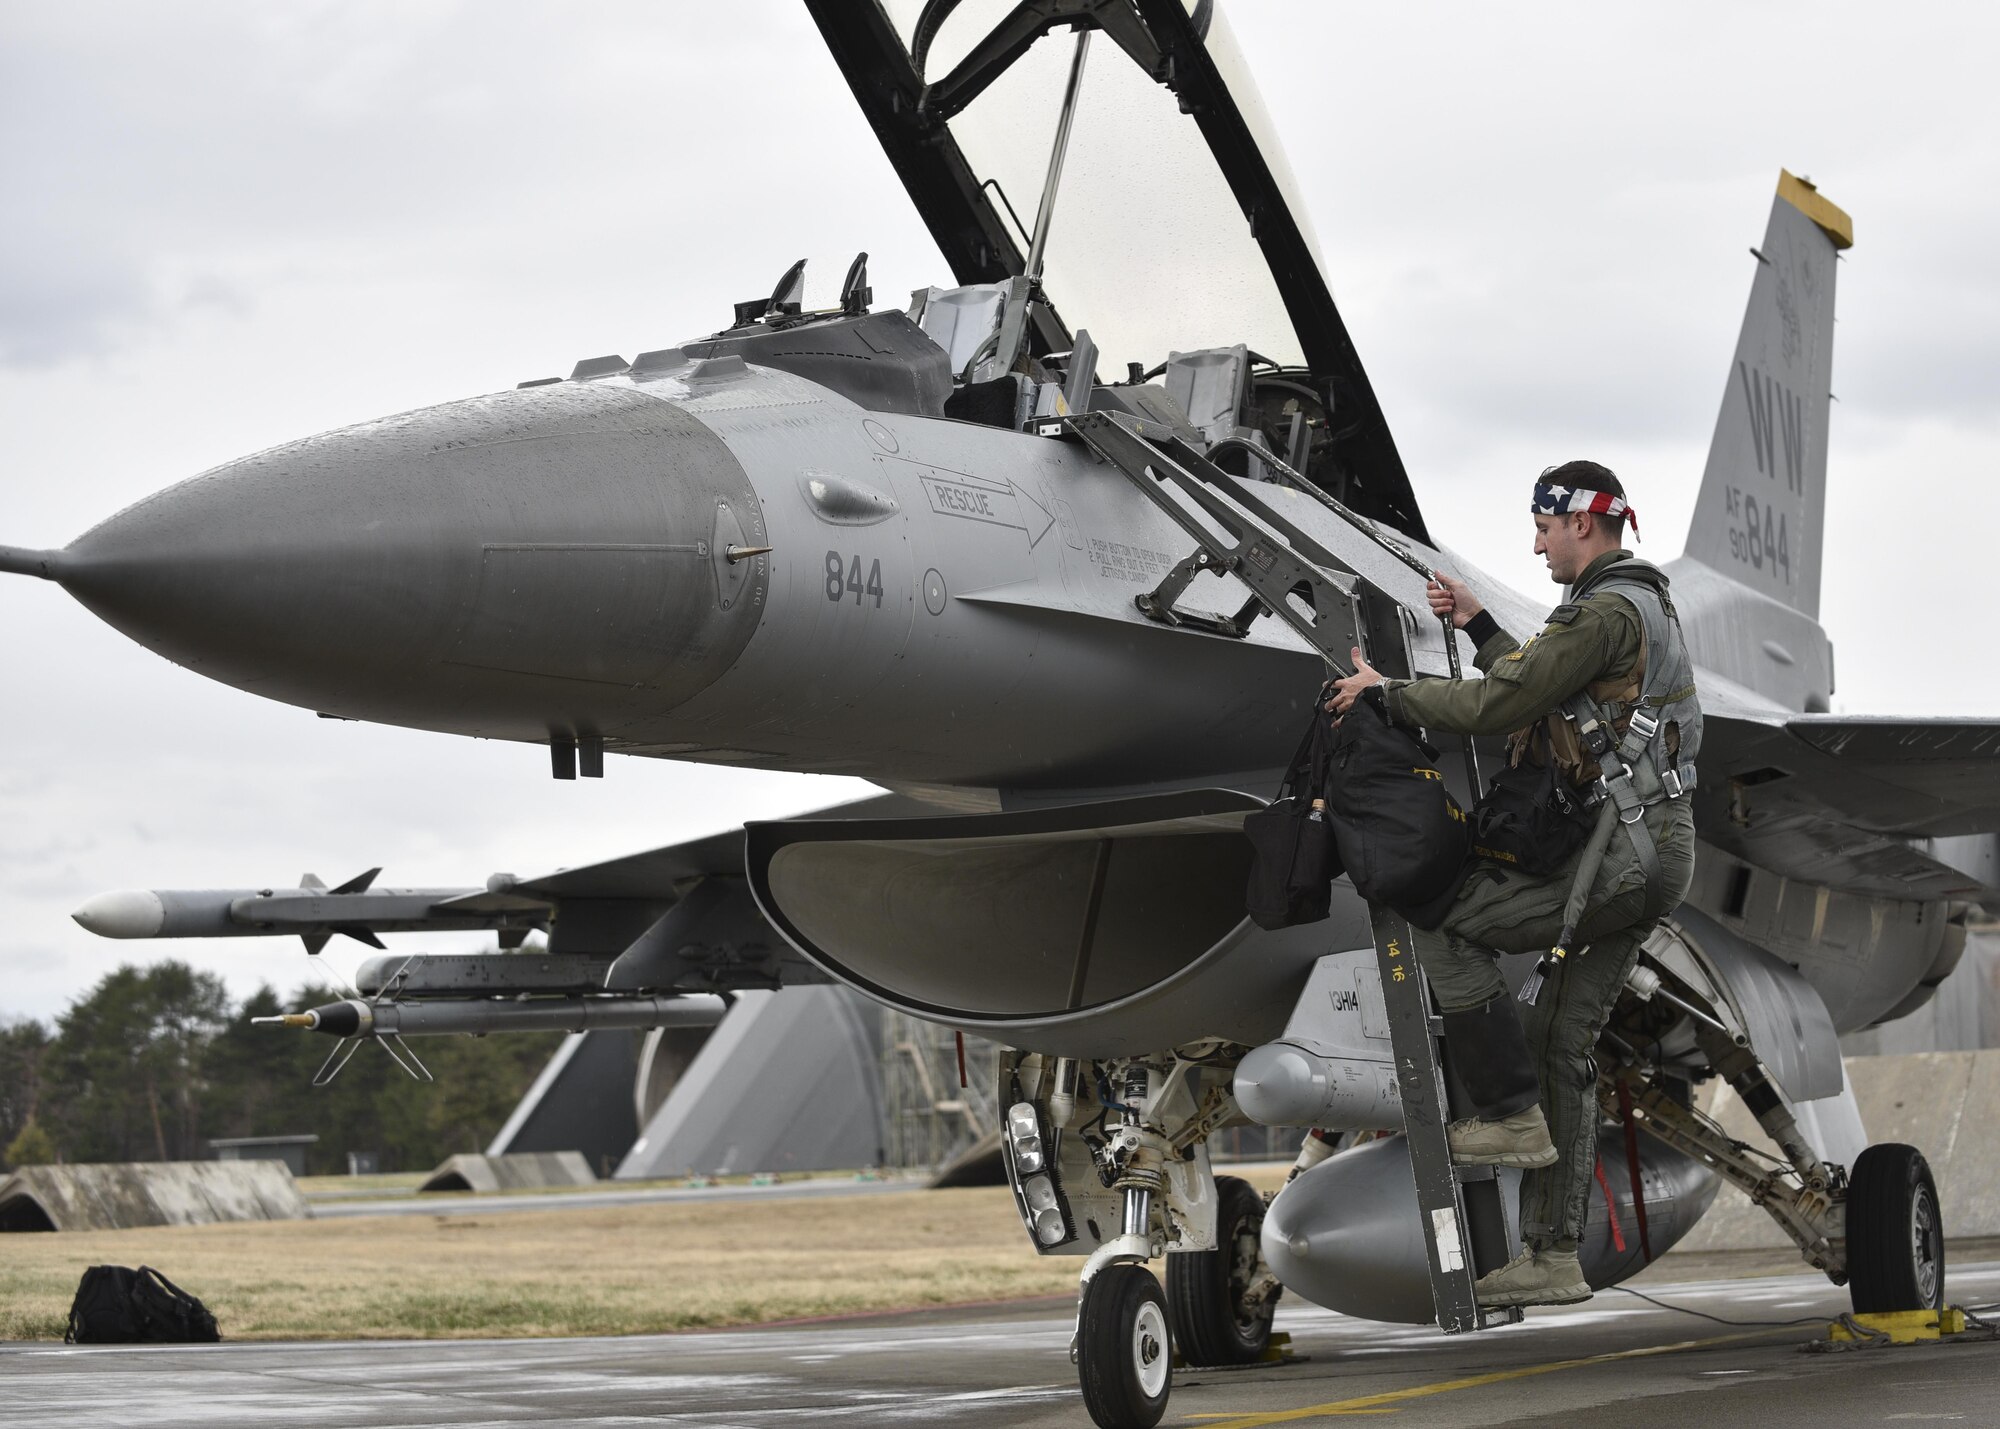 U.S. Air Force Capt. Dakota Newton, a 14th Fighter Squadron standards and evaluations liaison officer, climbs a ladder to the cockpit of an F-16 Fighting Falcon prior to the start of a bilateral exercise at Misawa Air Base, April 19, 2017. Exercises such as this enhance inoperability between the Air Force and Japan Air Self-Defense Forces and showcase the long standing military partnership and commitment between the two nations ensuring security and stability throughout the Indo Asia Pacific region. (U.S. Air Force photo by Staff Sgt. Melanie A. Hutto)